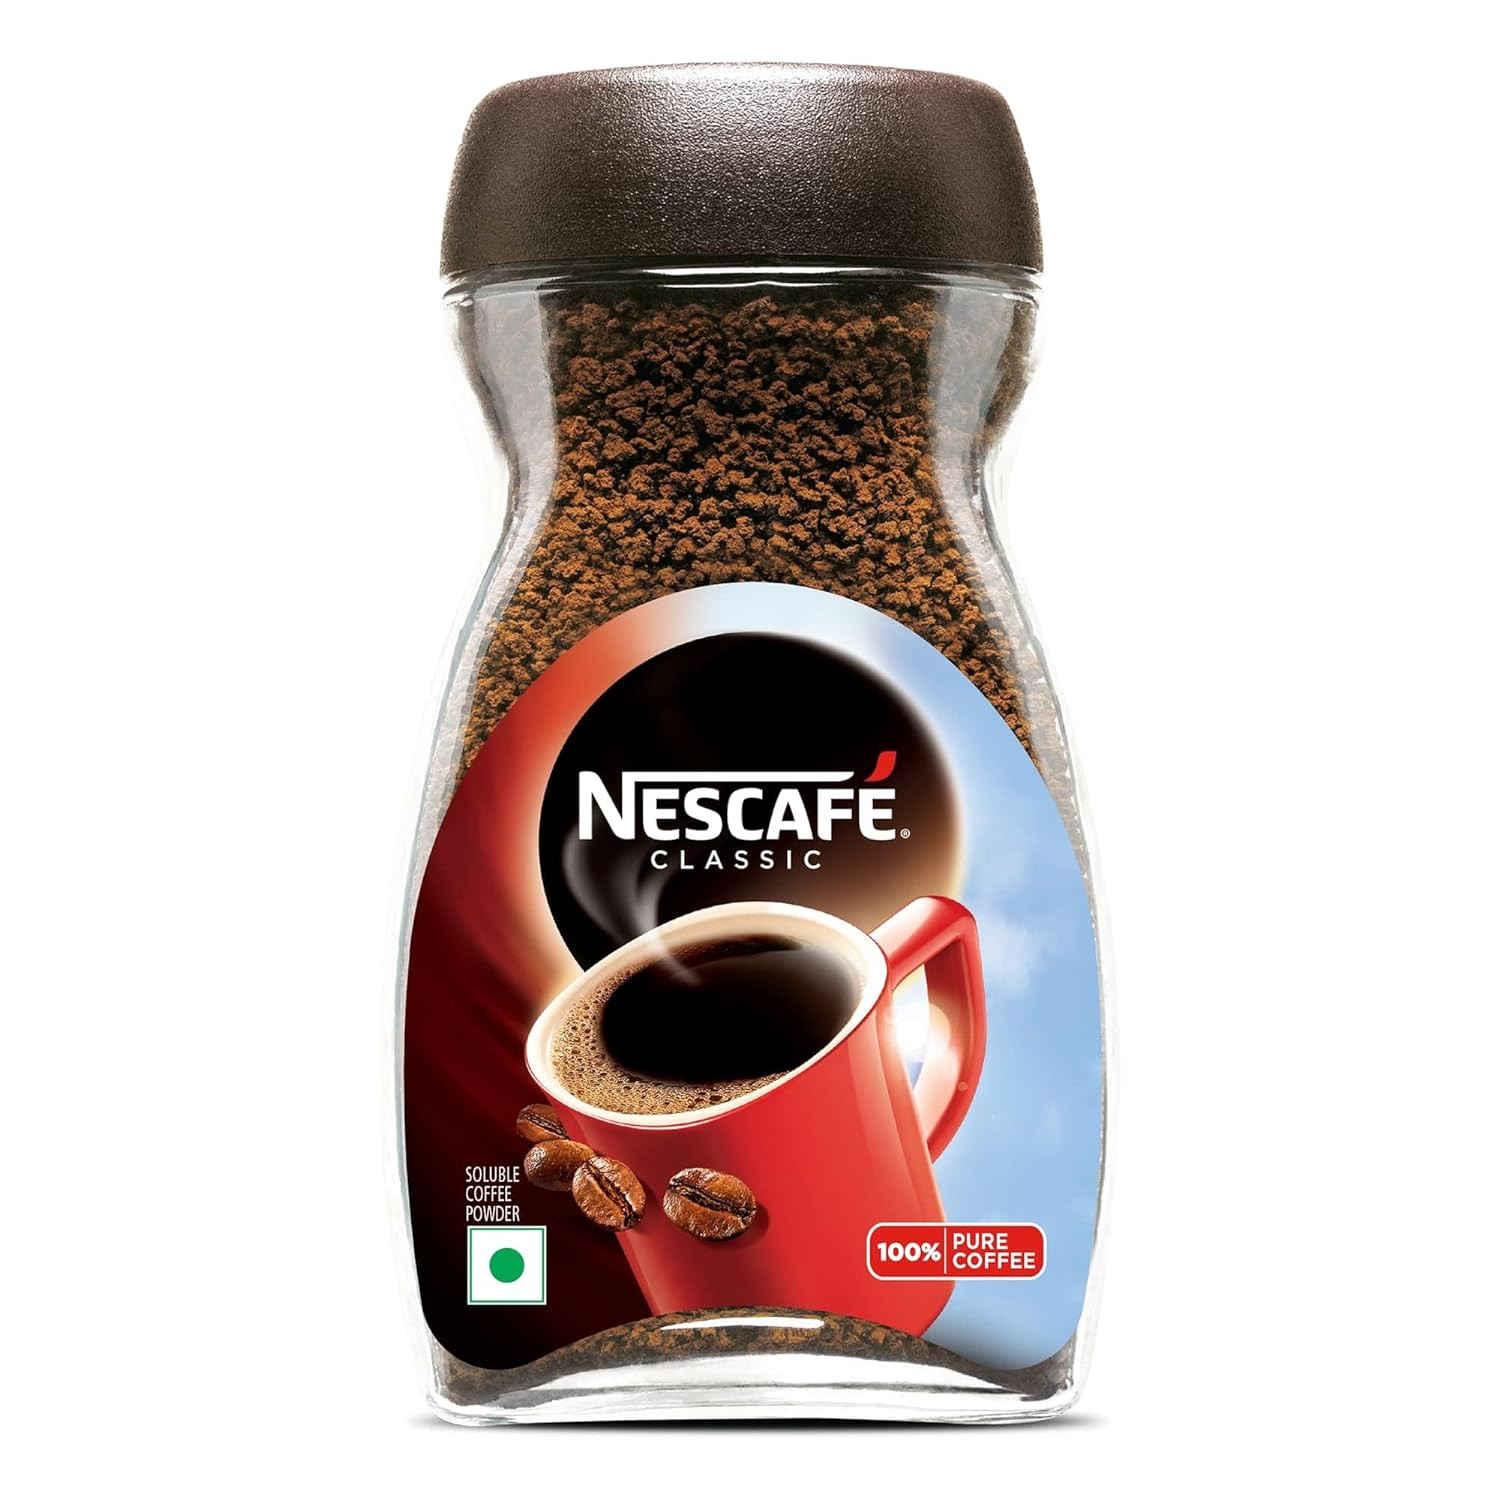 NESCAFE Classic Instant Coffee Powder, 45 g Jar | Instant Coffee Made with Robusta Beans | 100% Pure Coffee